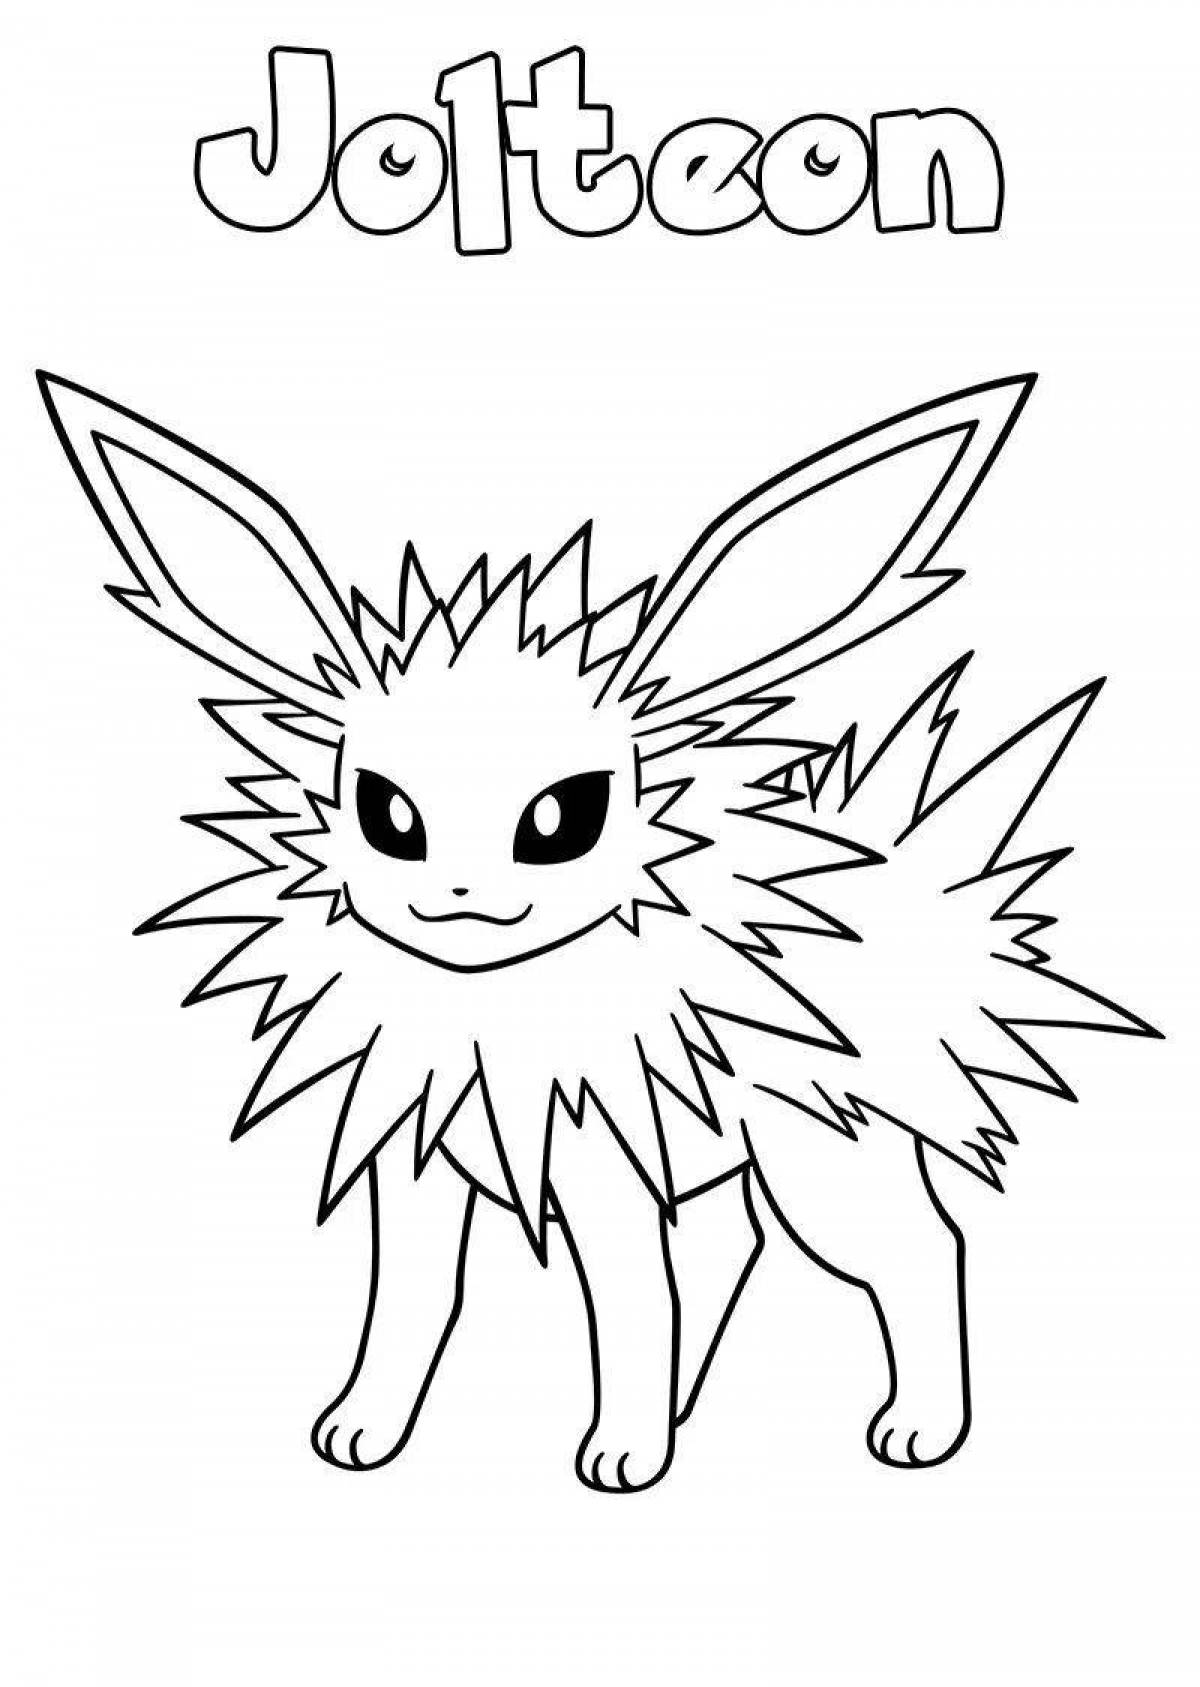 Live pokemon coloring pages